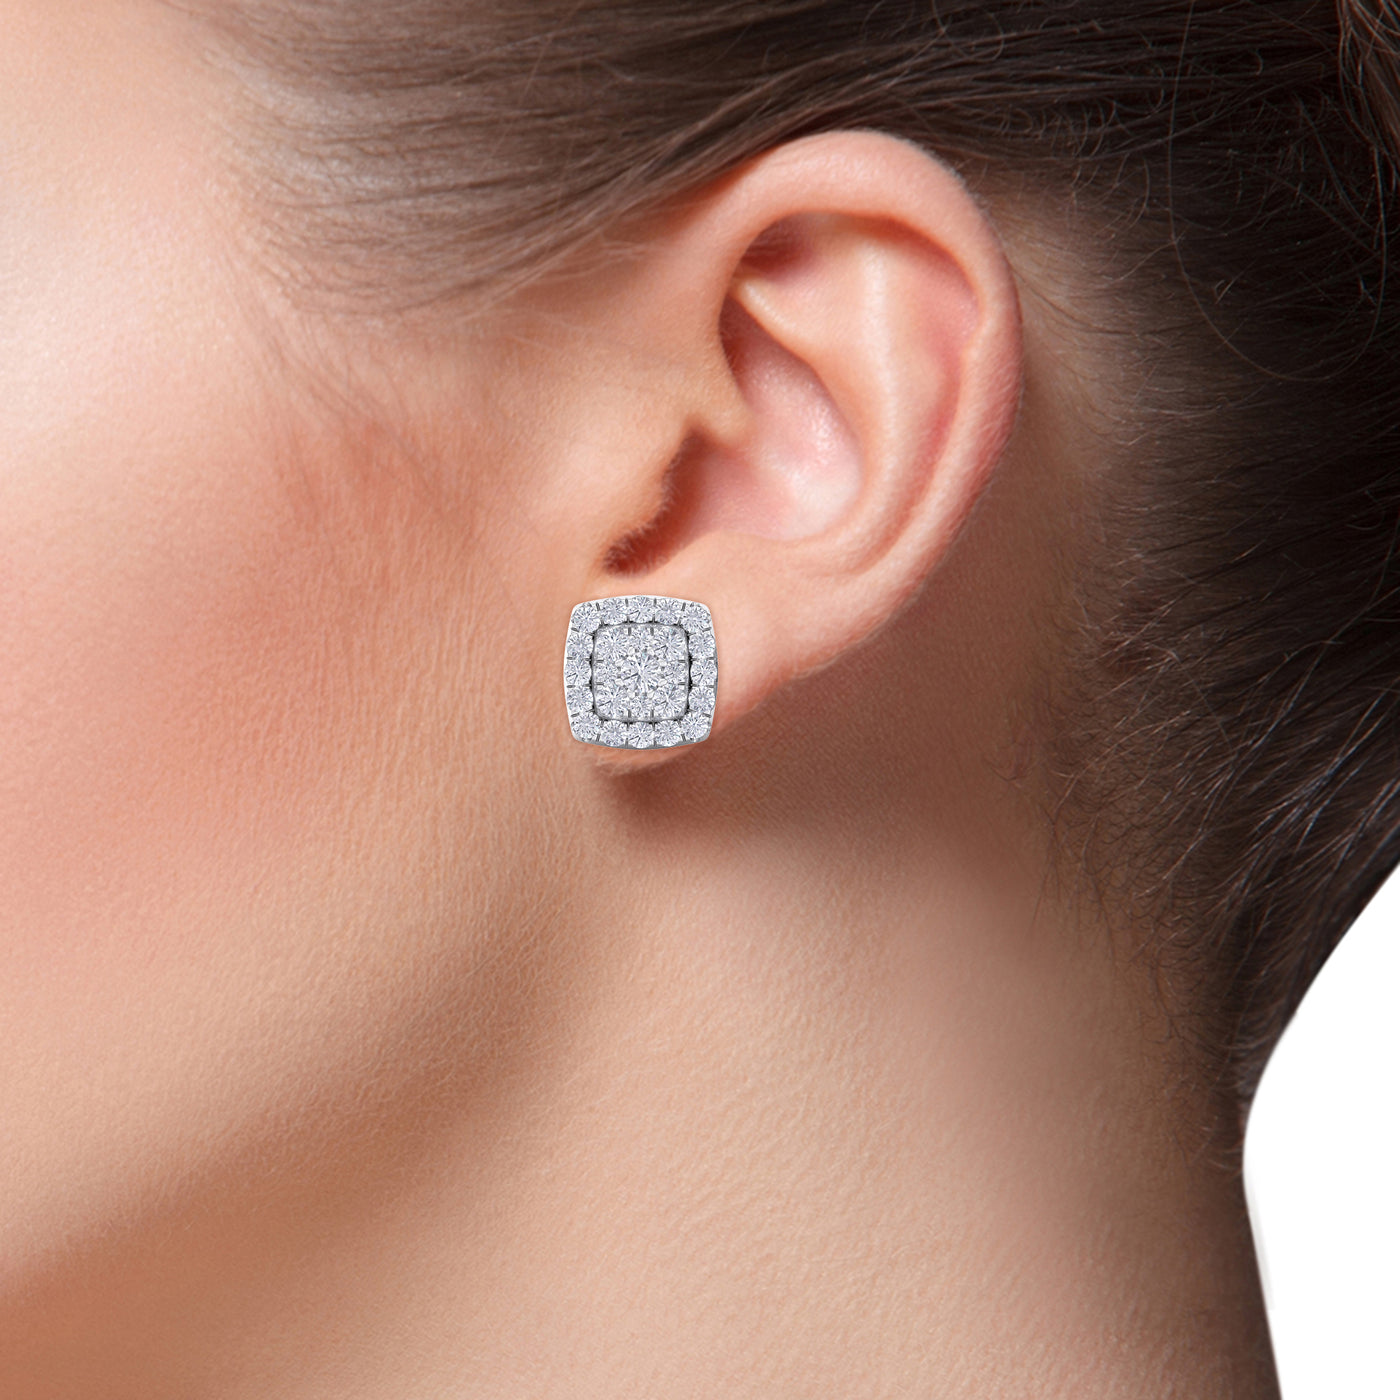 Square stud diamond earrings in yellow gold with white diamonds of 0.50 ct in weight